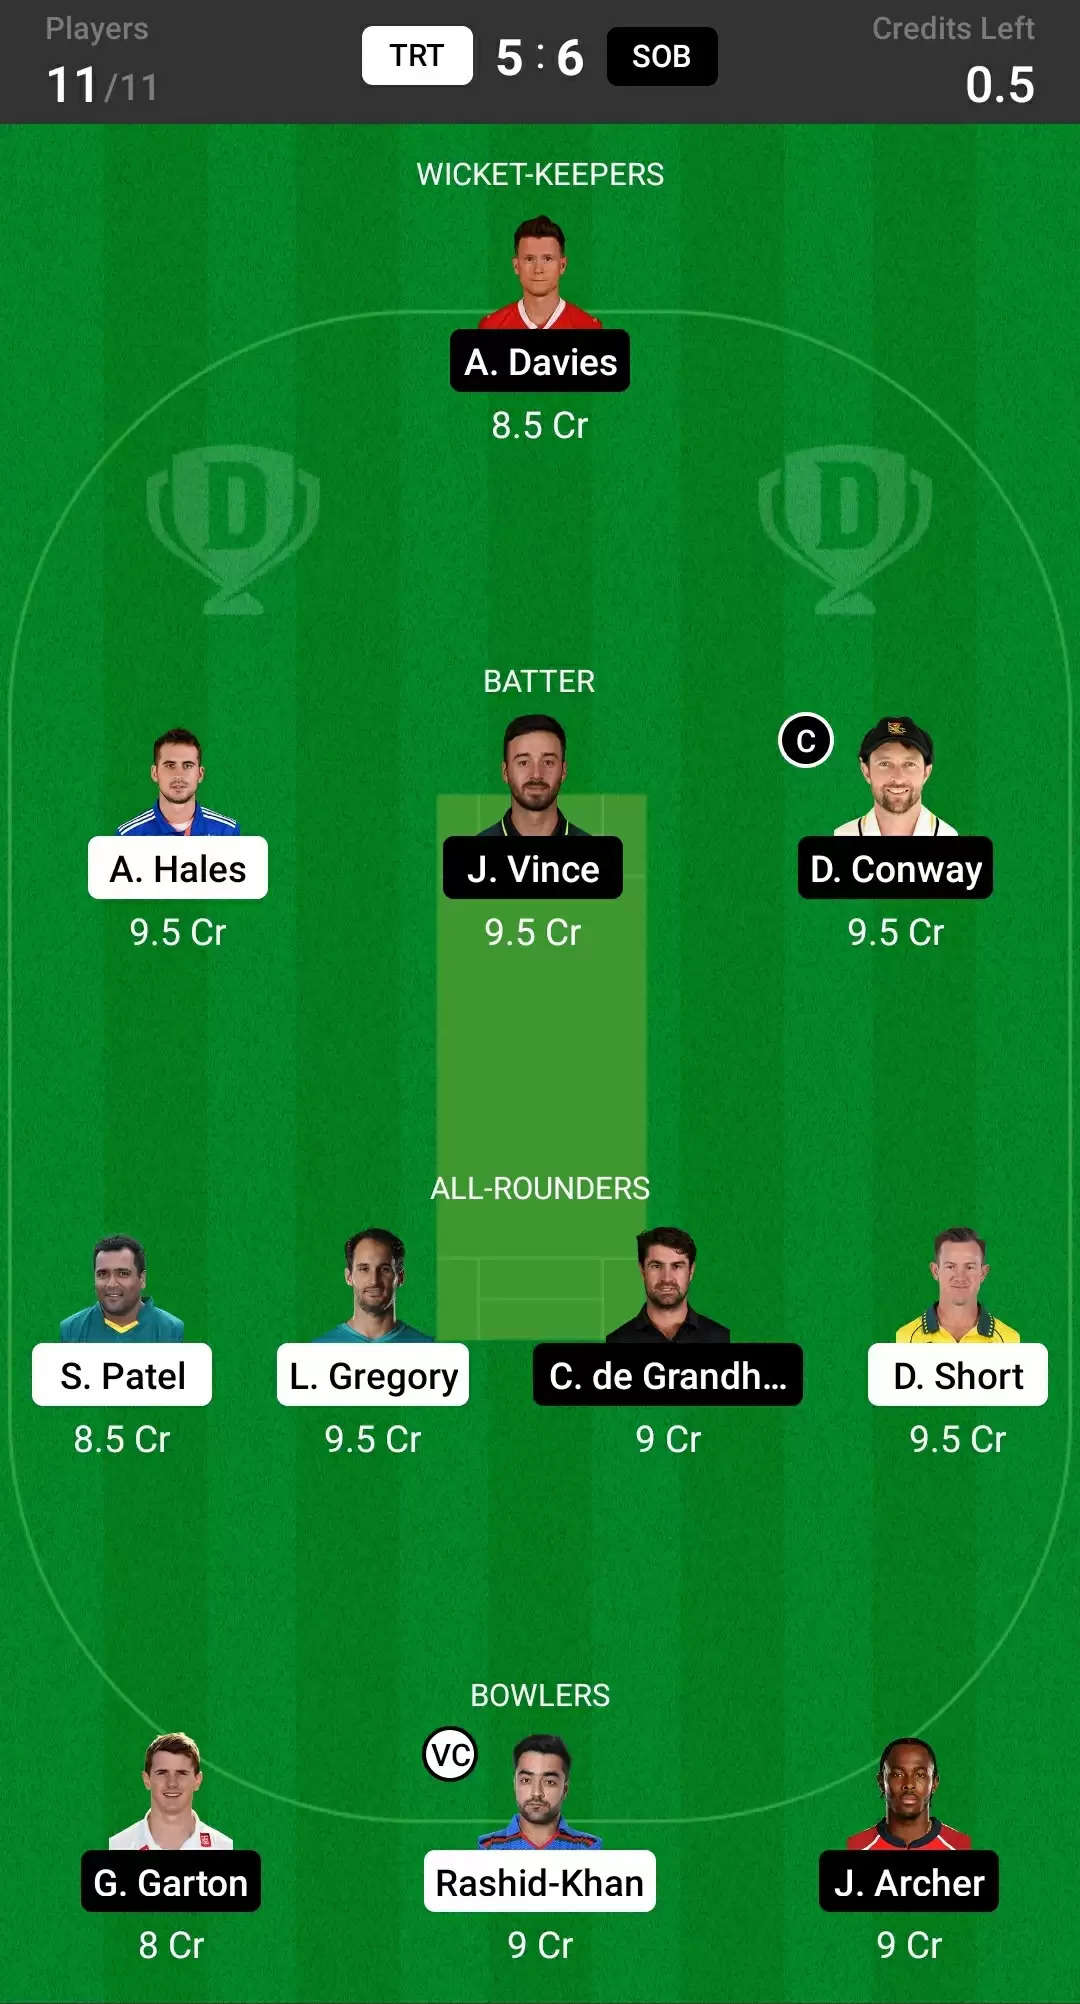 TRT vs SOB Dream11 Team Prediction for The Hundred Men’s 2021: Trent Rockets vs Southern Brave Best Fantasy Cricket Tips, Strongest Playing XI, Pitch Report and Player Updates